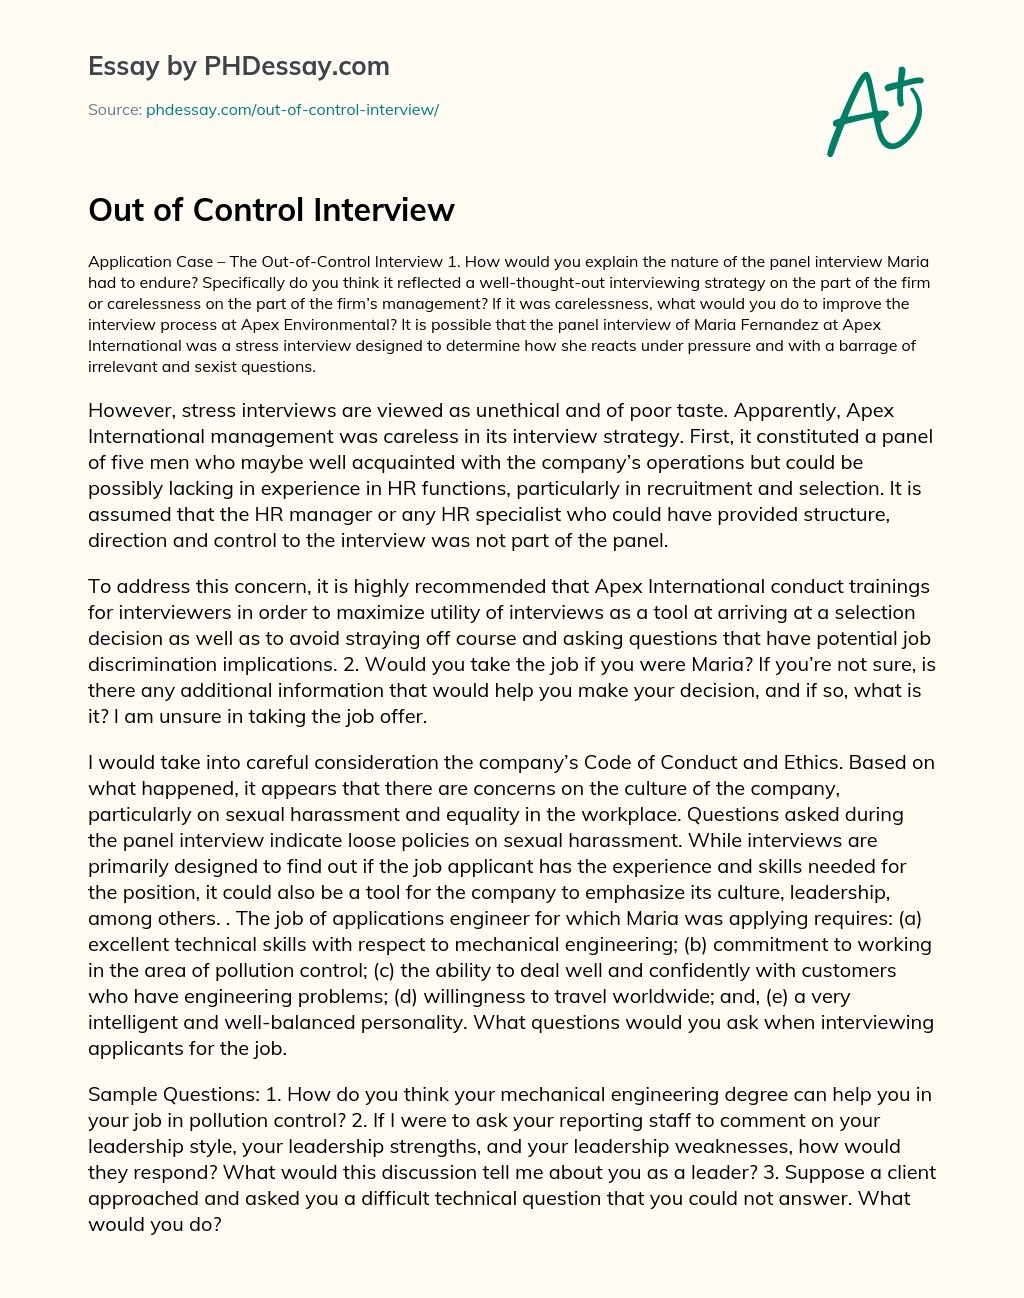 Out of Control Interview essay